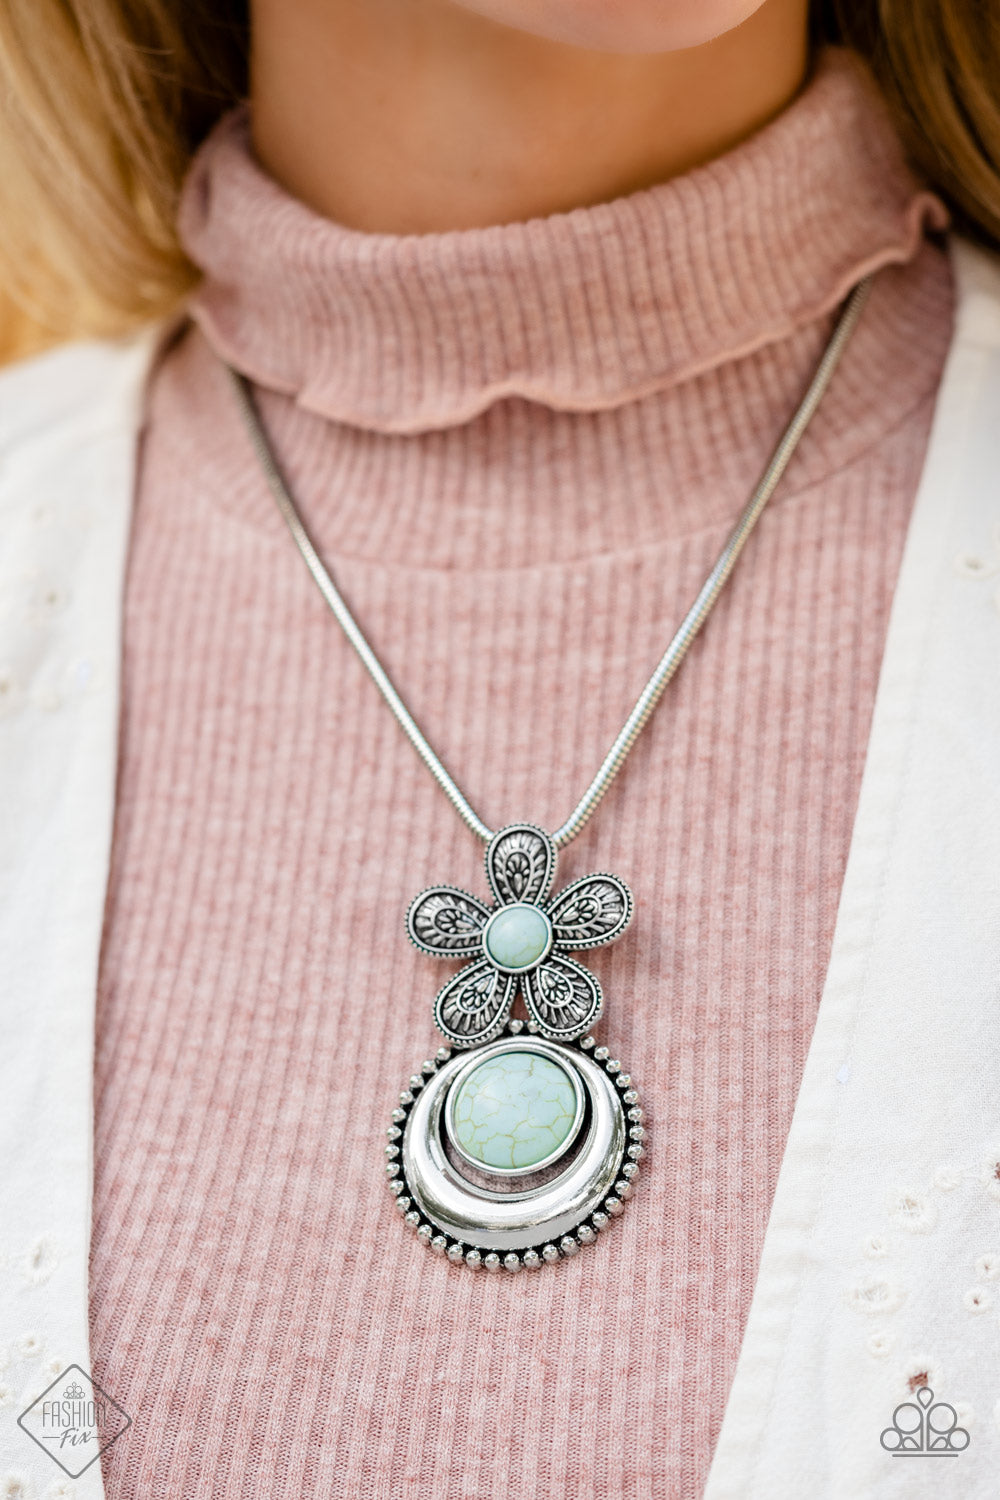 Fluttering from a silver snake chain, an oversized flower with detailed petals blooms around a light blue stone center. A silver pendant with a studded border swings from the single flower for additional movement. A refreshing oversized stone in the same hue is pressed into the center of the pendant for a pop of color amongst the metallic texture. Features an adjustable clasp closure. As the stone elements in this piece are natural, some color variation is normal.